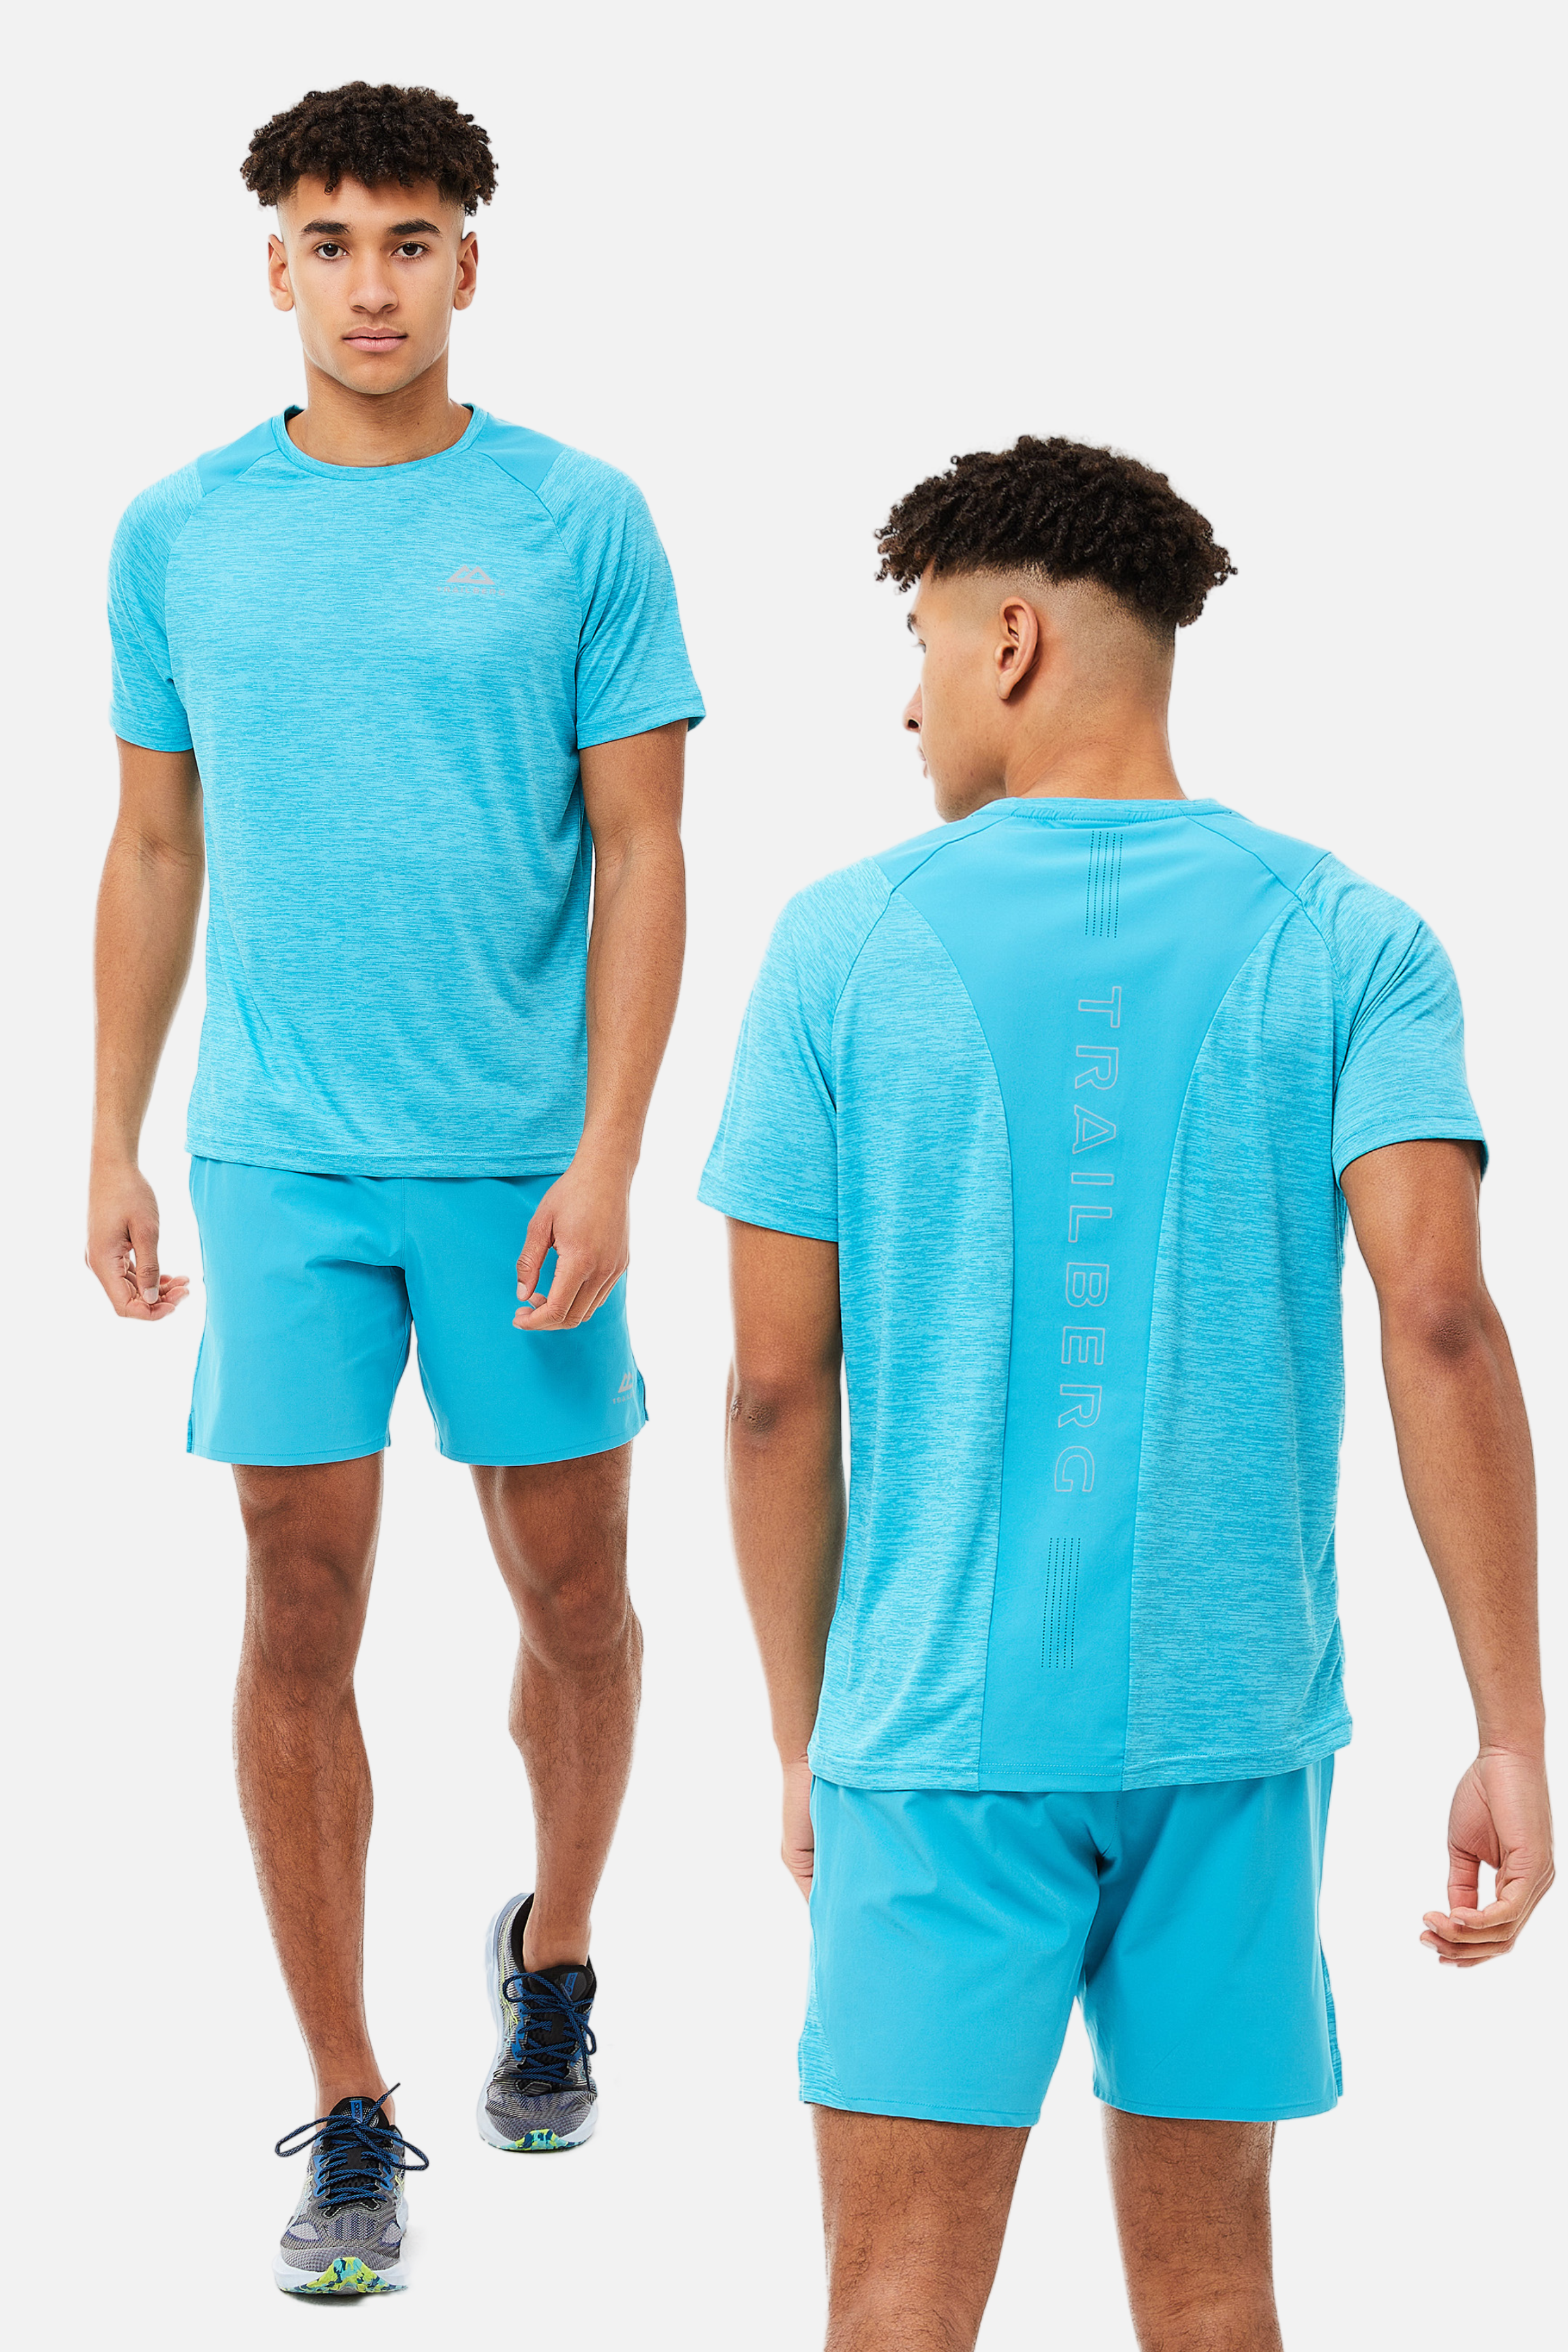 ELEMENT TWINSET - TEAL